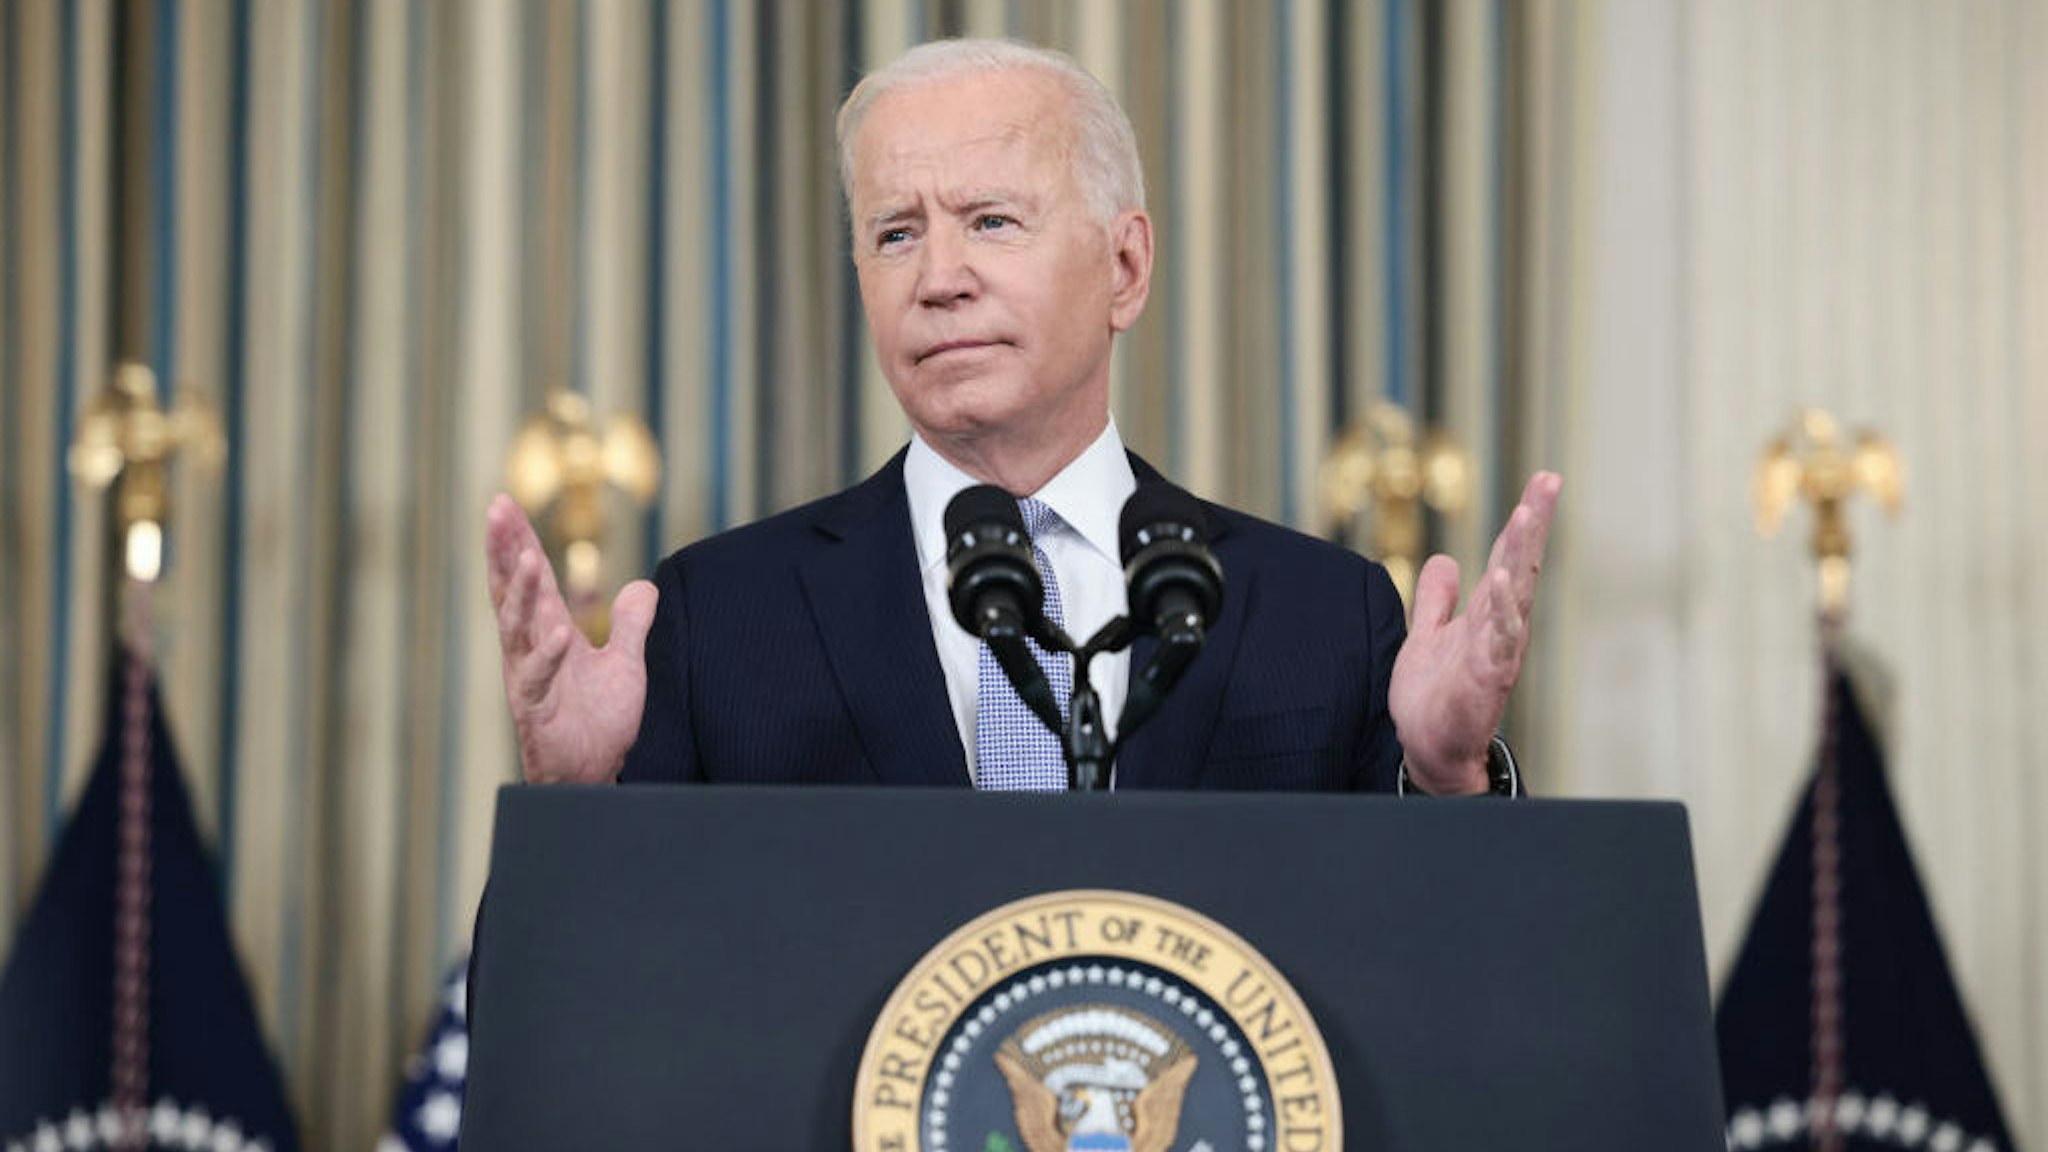 WASHINGTON, DC - SEPTEMBER 24: U.S. President Joe Biden gestures as he delivers remarks on his administration’s COVID-19 response and vaccination program from the State Dining Room of the White House on September 24, 2021 in Washington, DC. President Biden announced that Americans 65 and older and frontline workers who received the Pfizer-BioNTech COVID-19 vaccine over six months ago will be eligible for booster shots. (Photo by Anna Moneymaker/Getty Images)